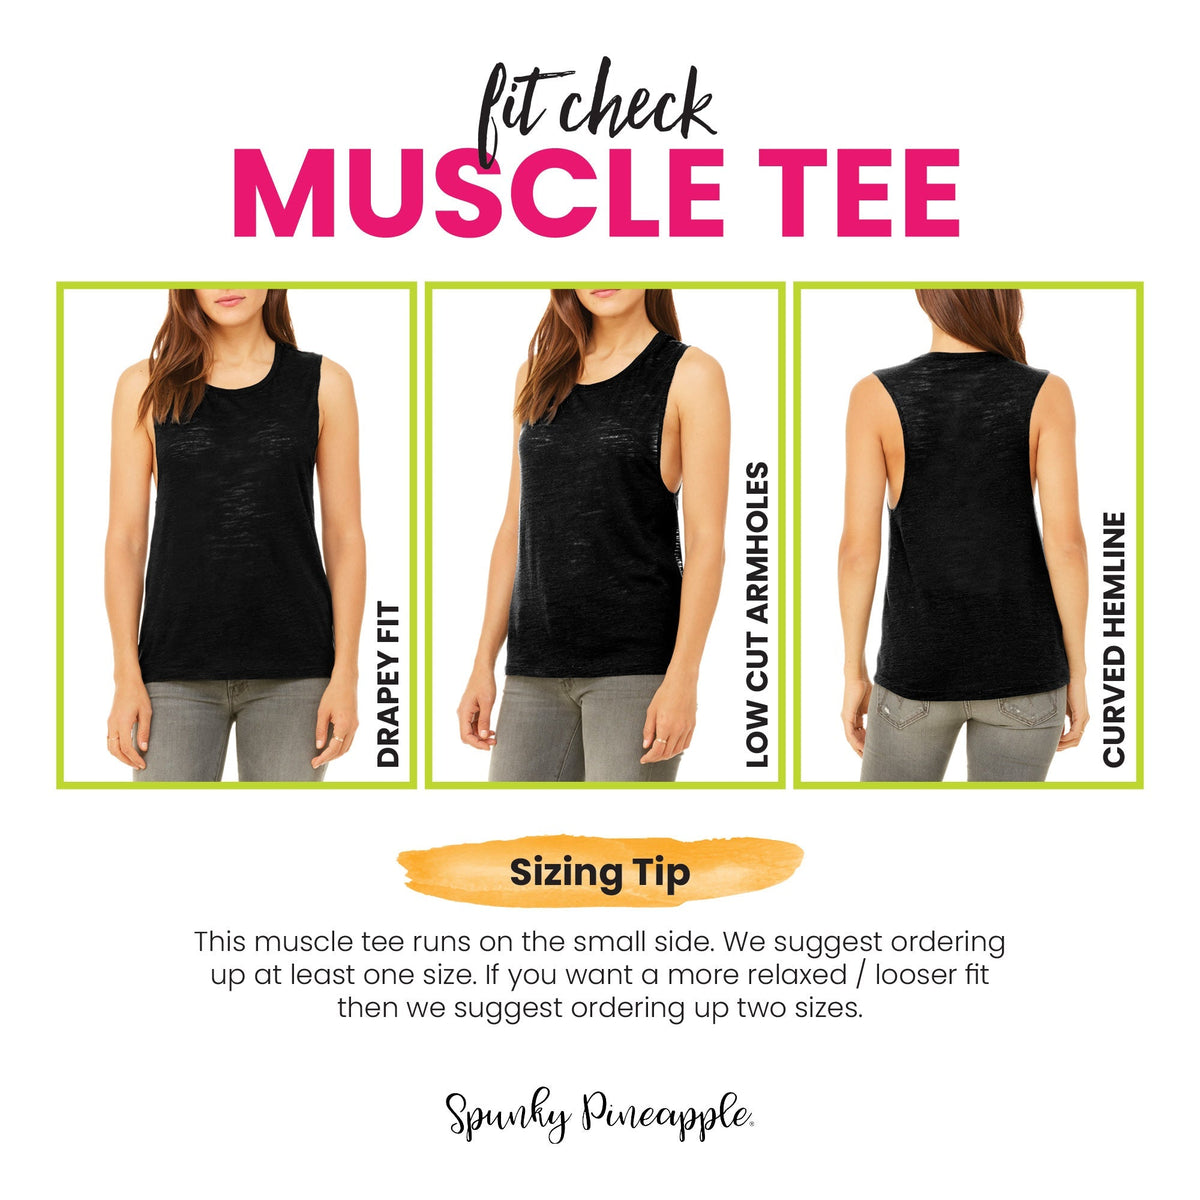 Total Bad Donkey Muscle Tee